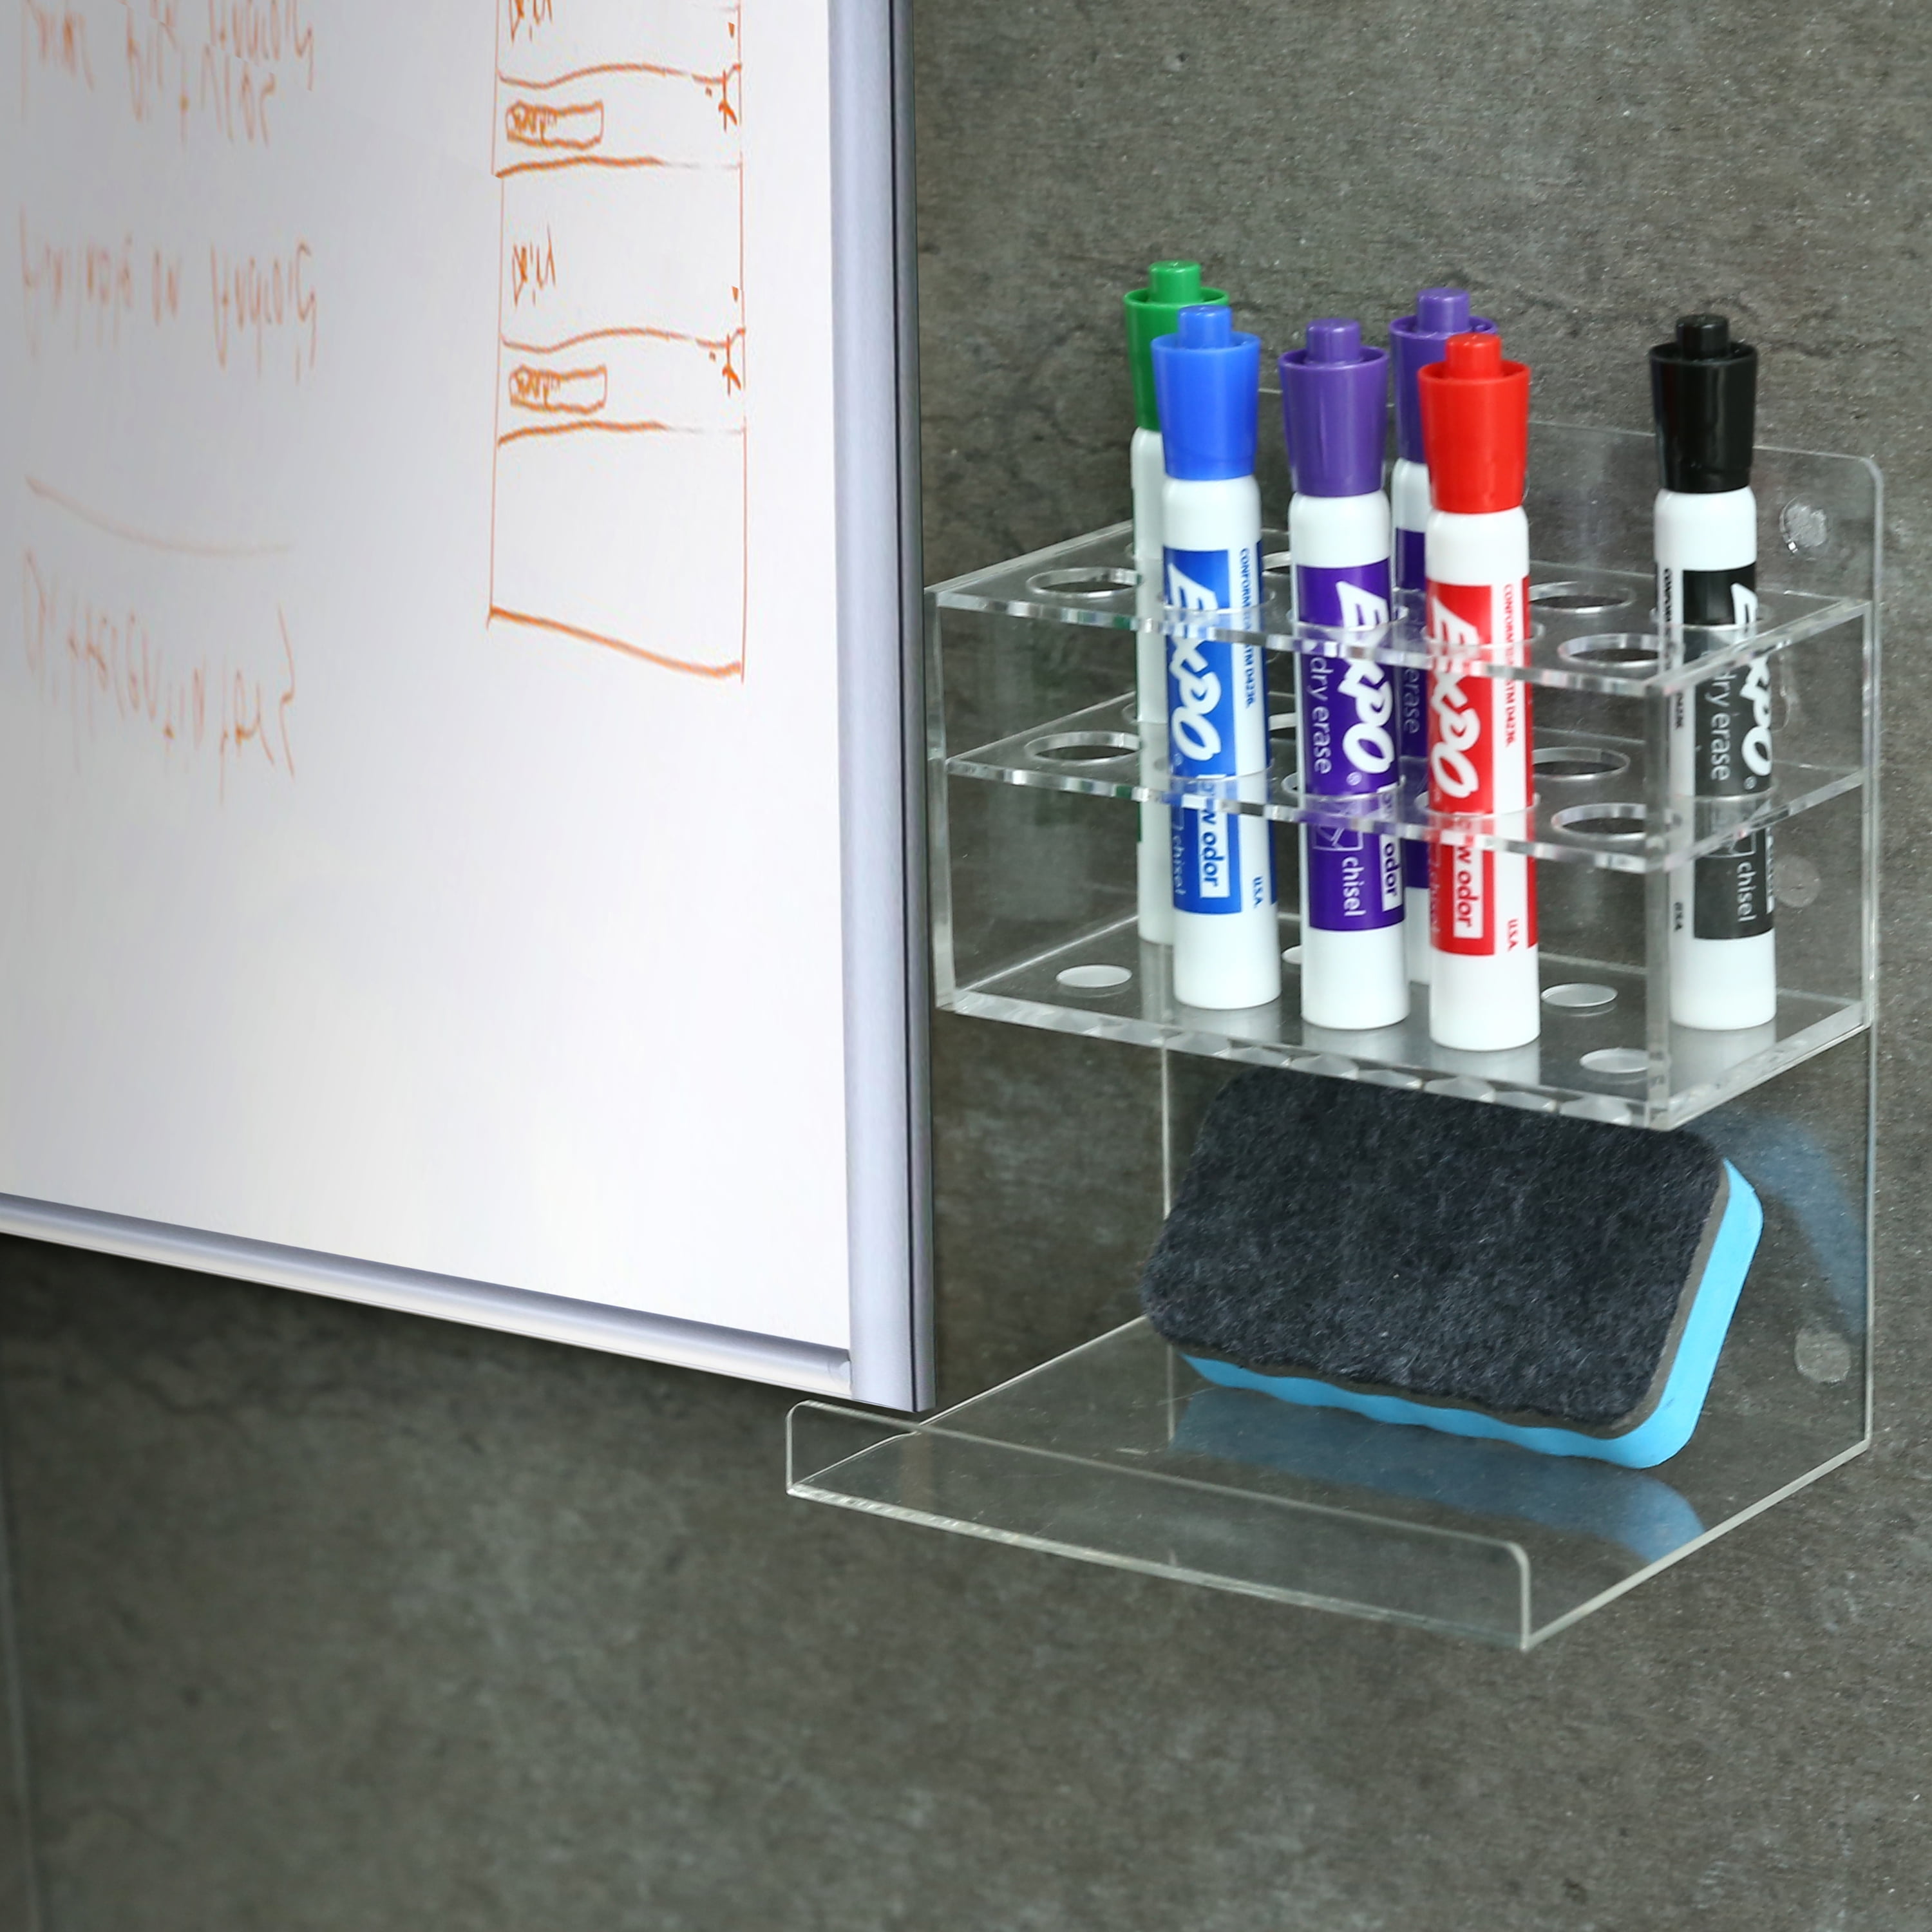 MyGift Wall Mounted Black Acrylic Dry Erase Marker Holder Organizer for 6  Markers and Eraser, Hanging Whiteboard Accessories Rack for Office Home  Dorm